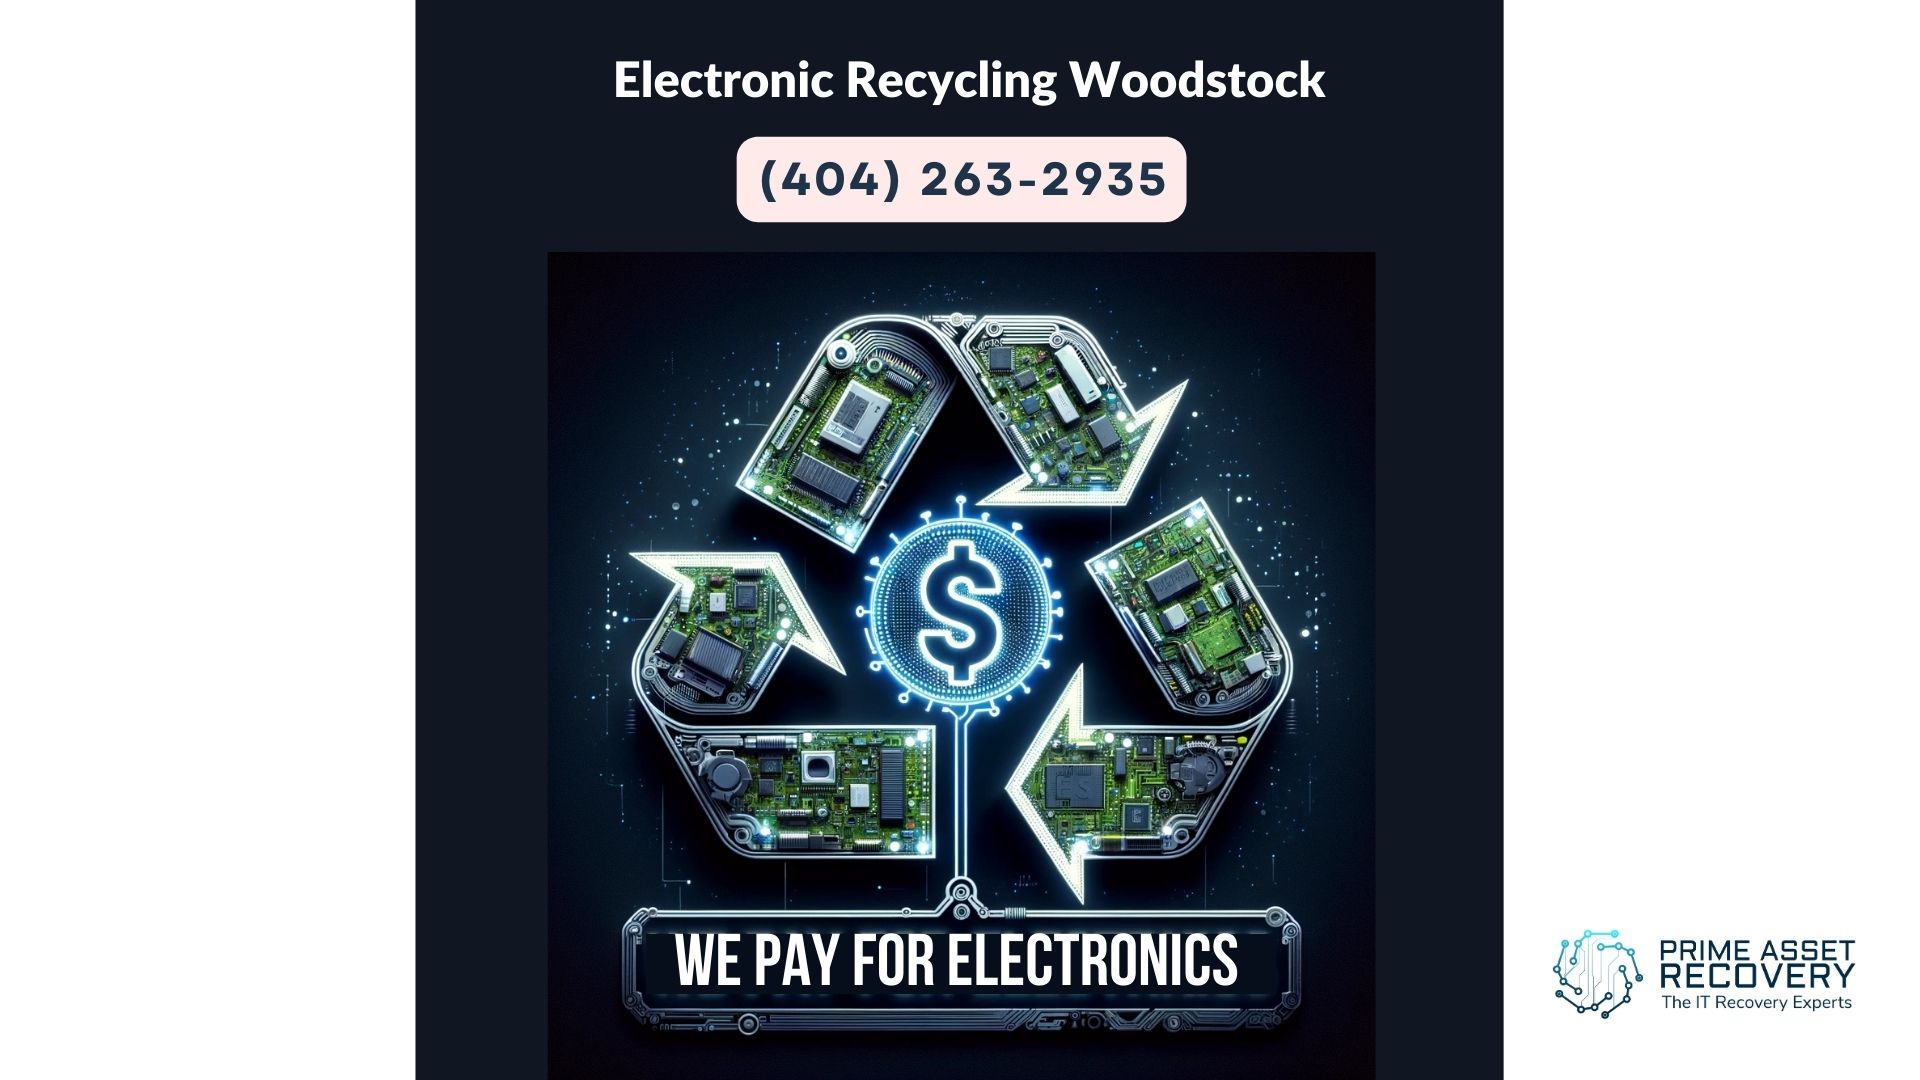 Computer Electronic Recycling Woodstock - Prime Asset Recovery Your Partner in Responsible Electronics Recycling